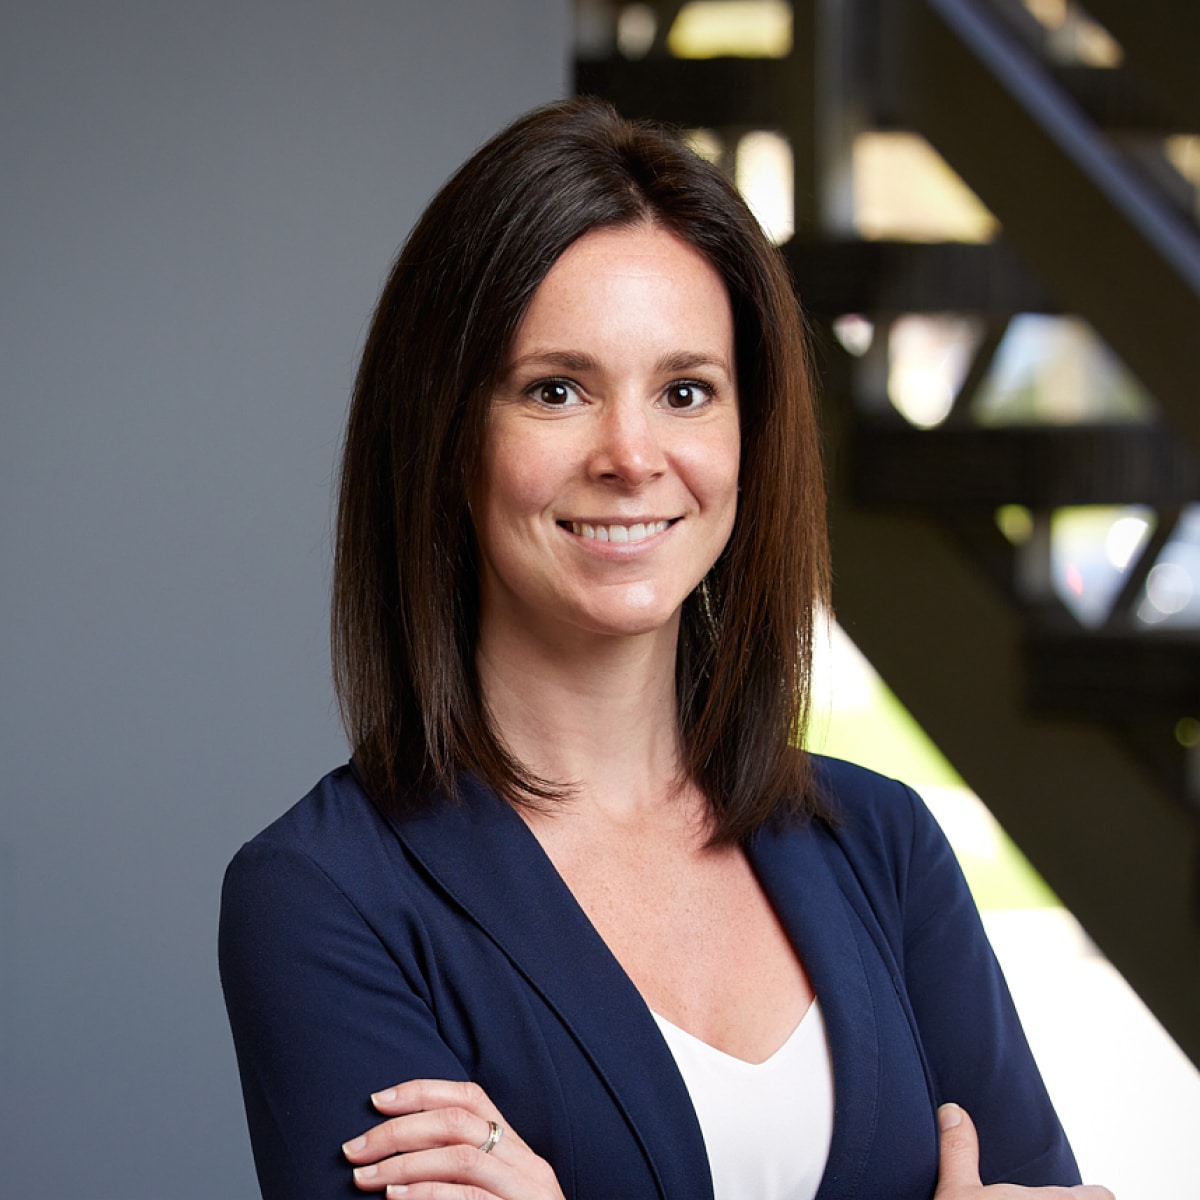 An image of Laura Platt CPA, Manager, Tax Services at Ford Keast LLP in London